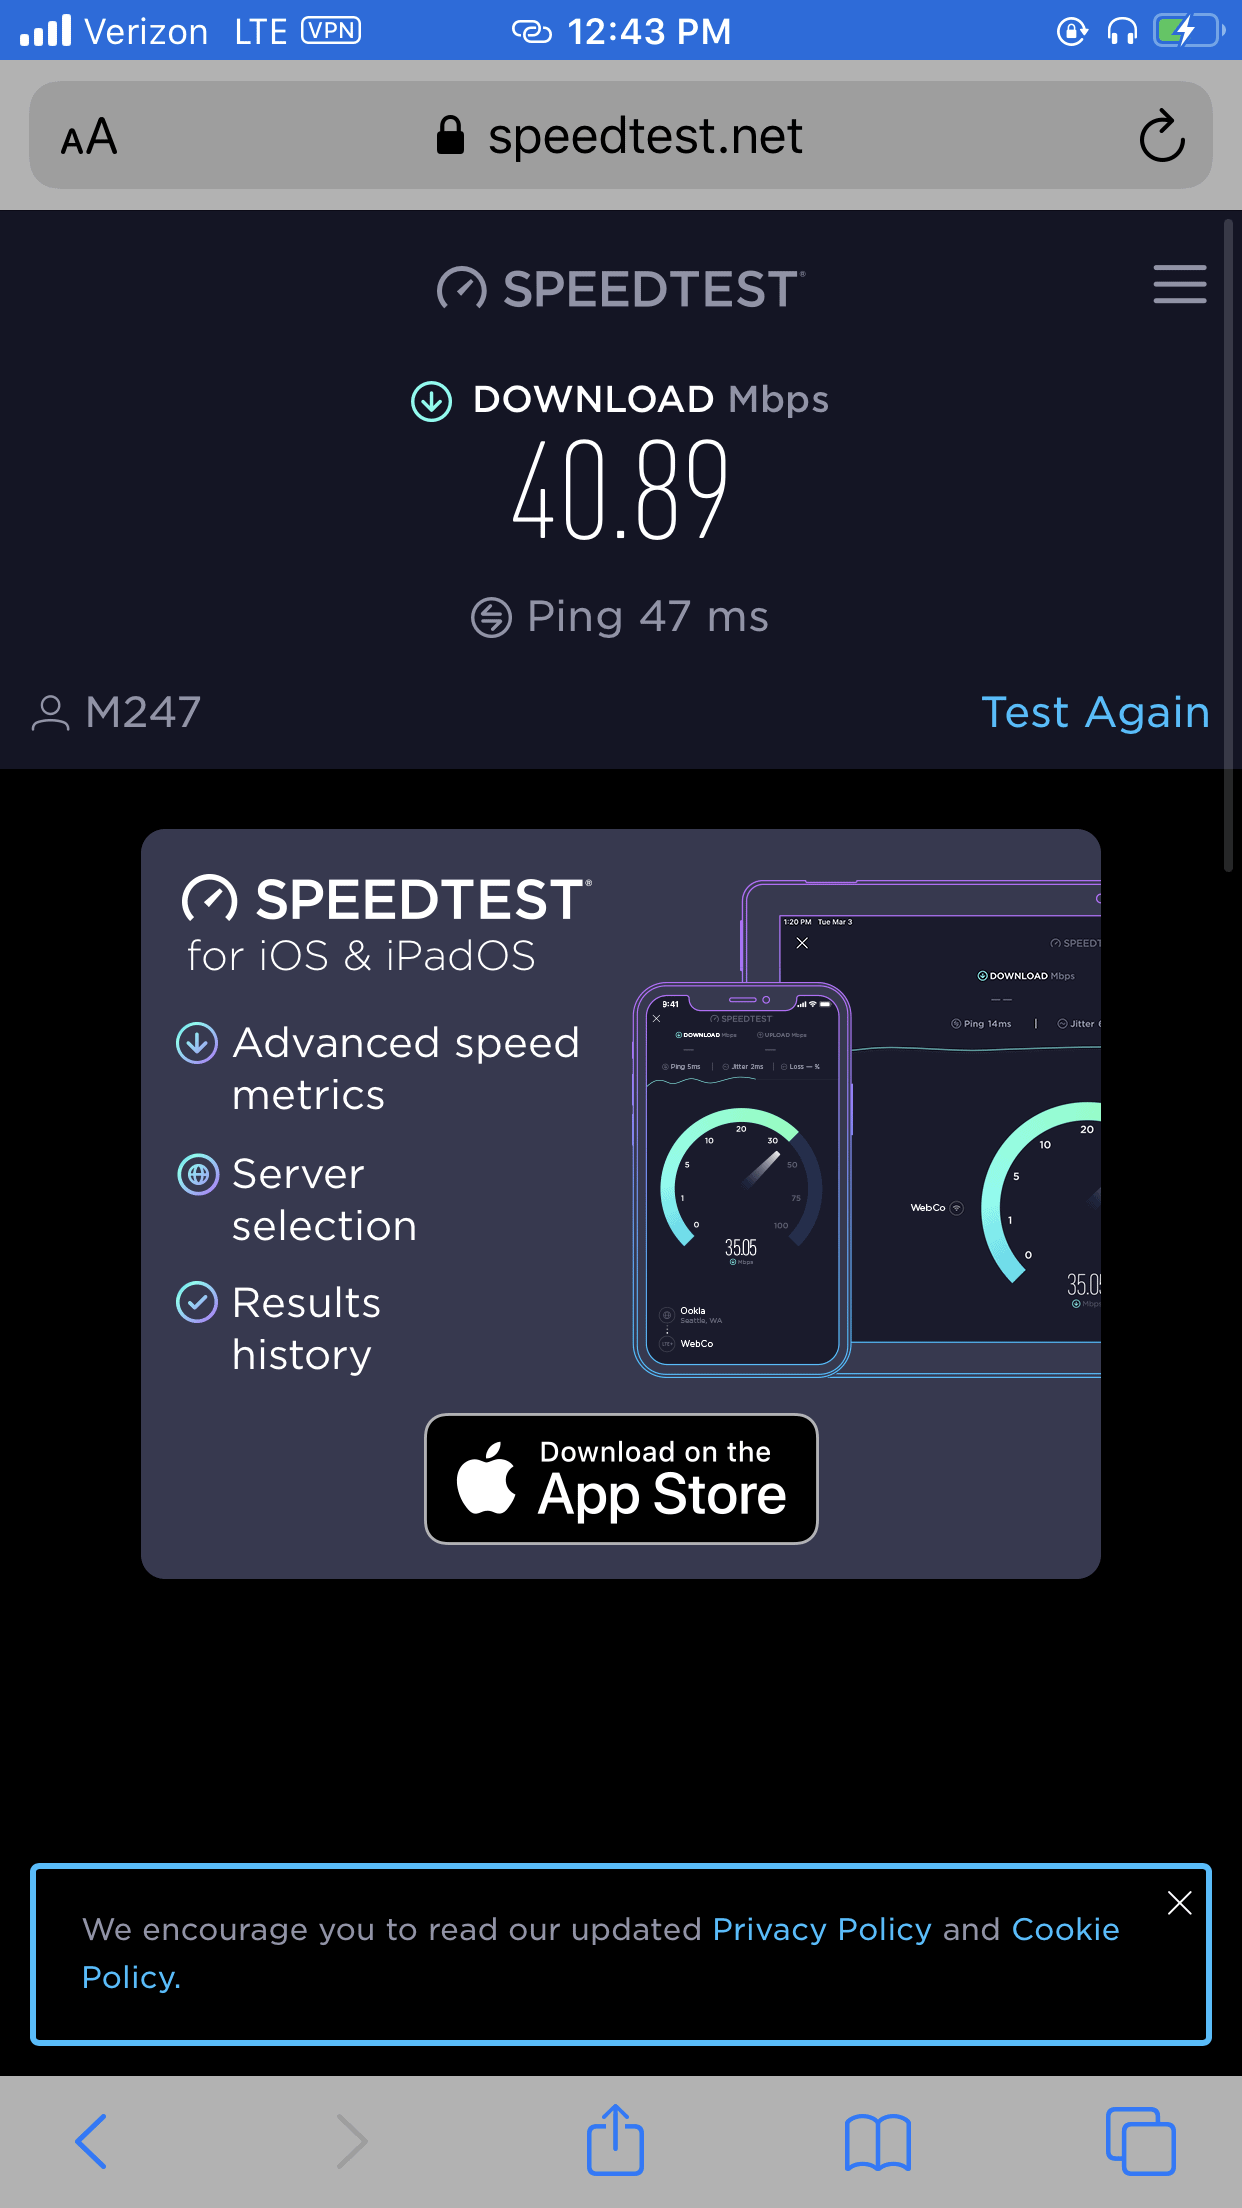 Mozilla VPN Speed Test on iOS with VPN - Connected